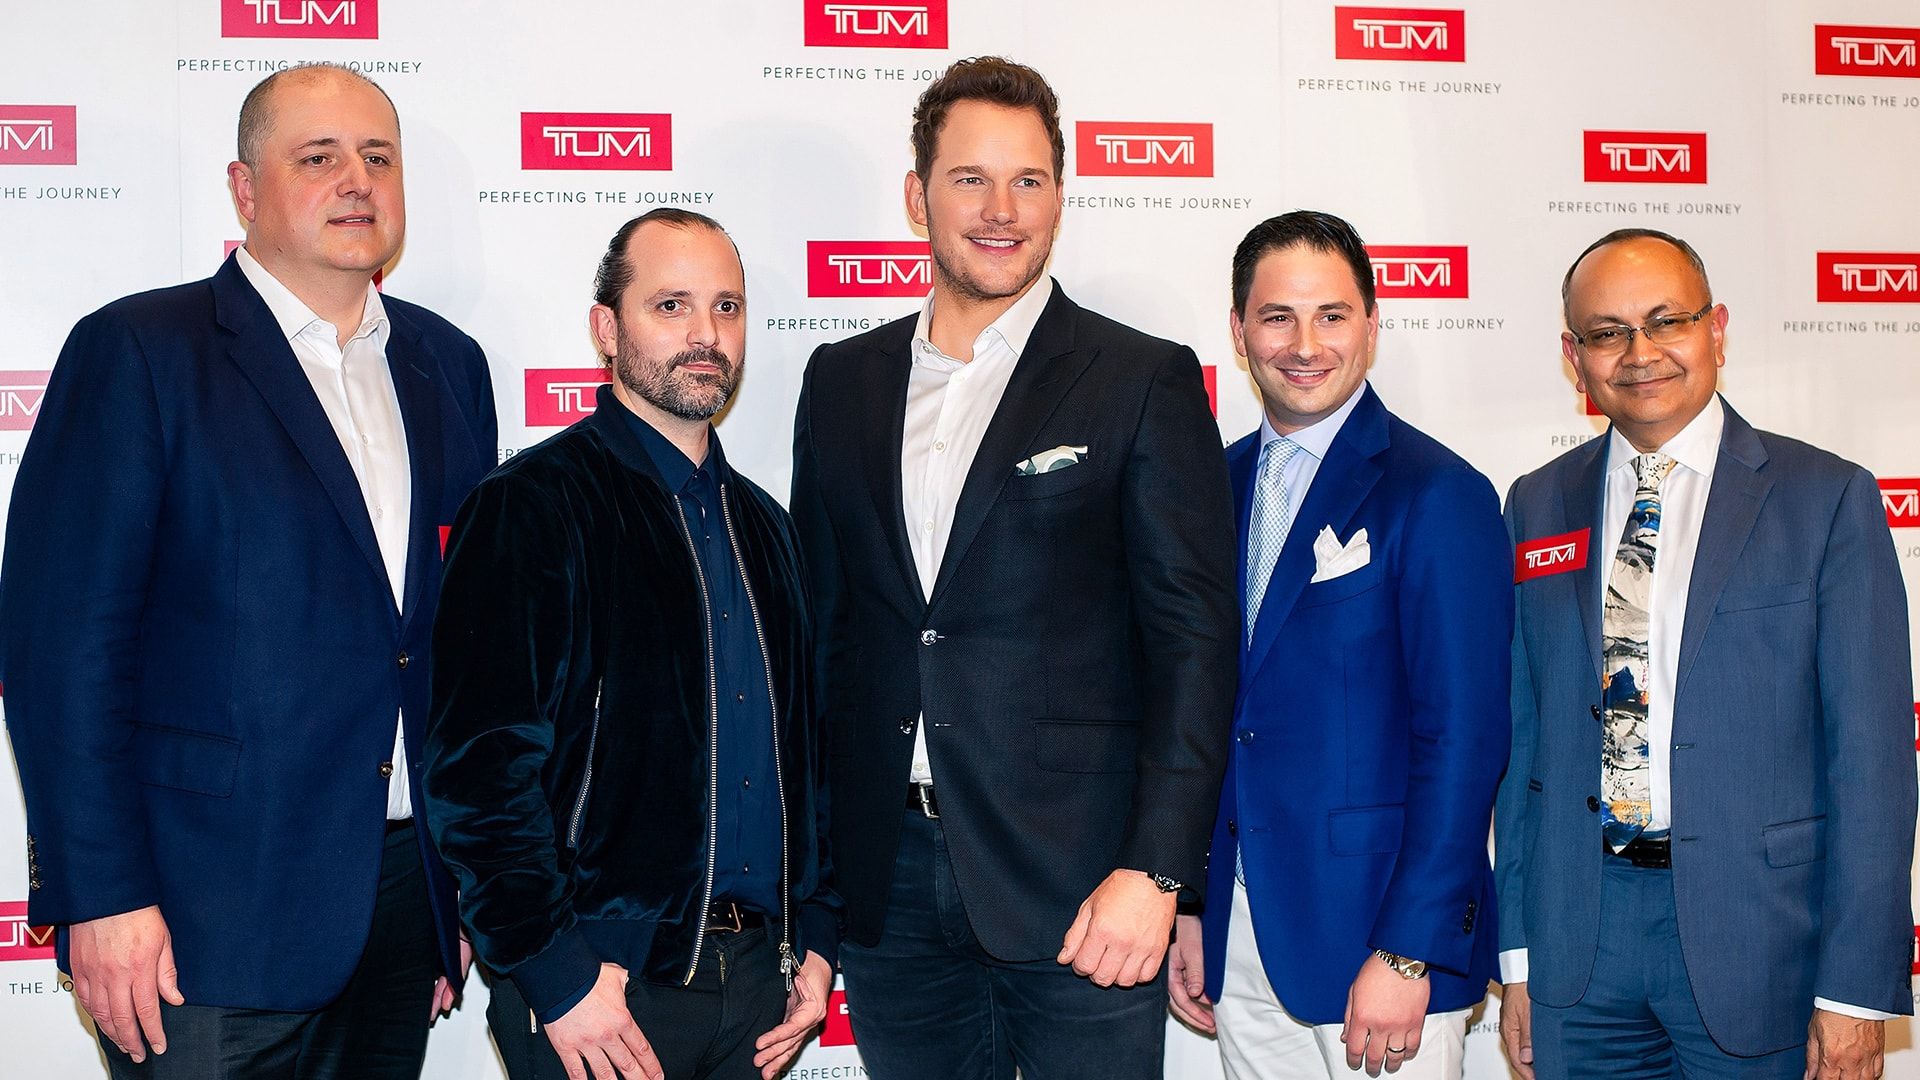 Here’s what went down at the TUMI x Chris Pratt VIP party in Hong Kong